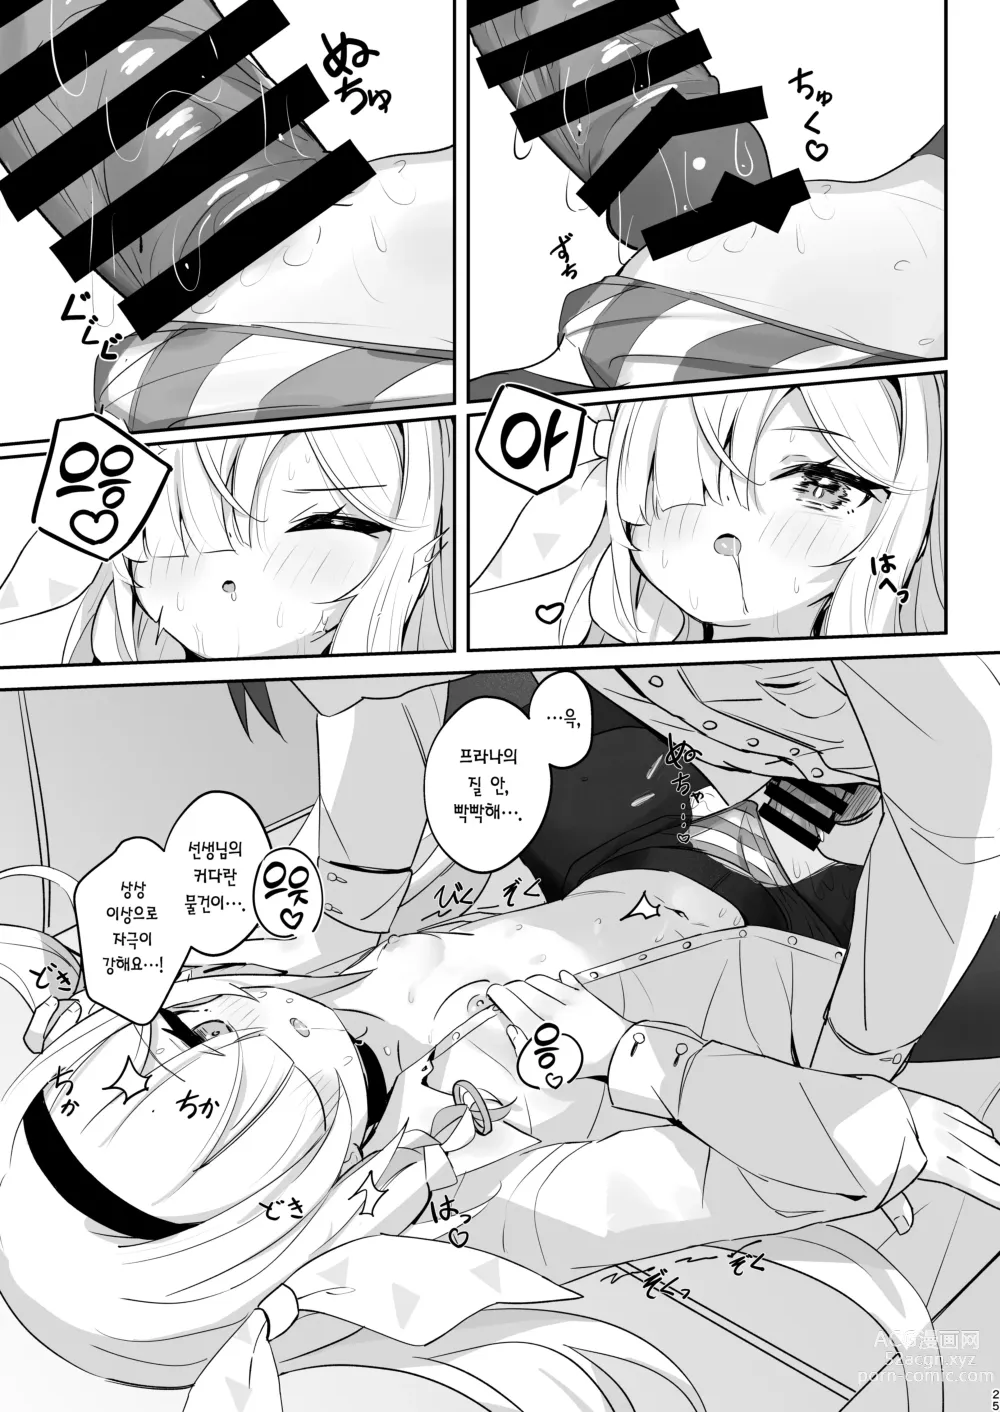 Page 24 of doujinshi 이 따스함을 알아버렸어